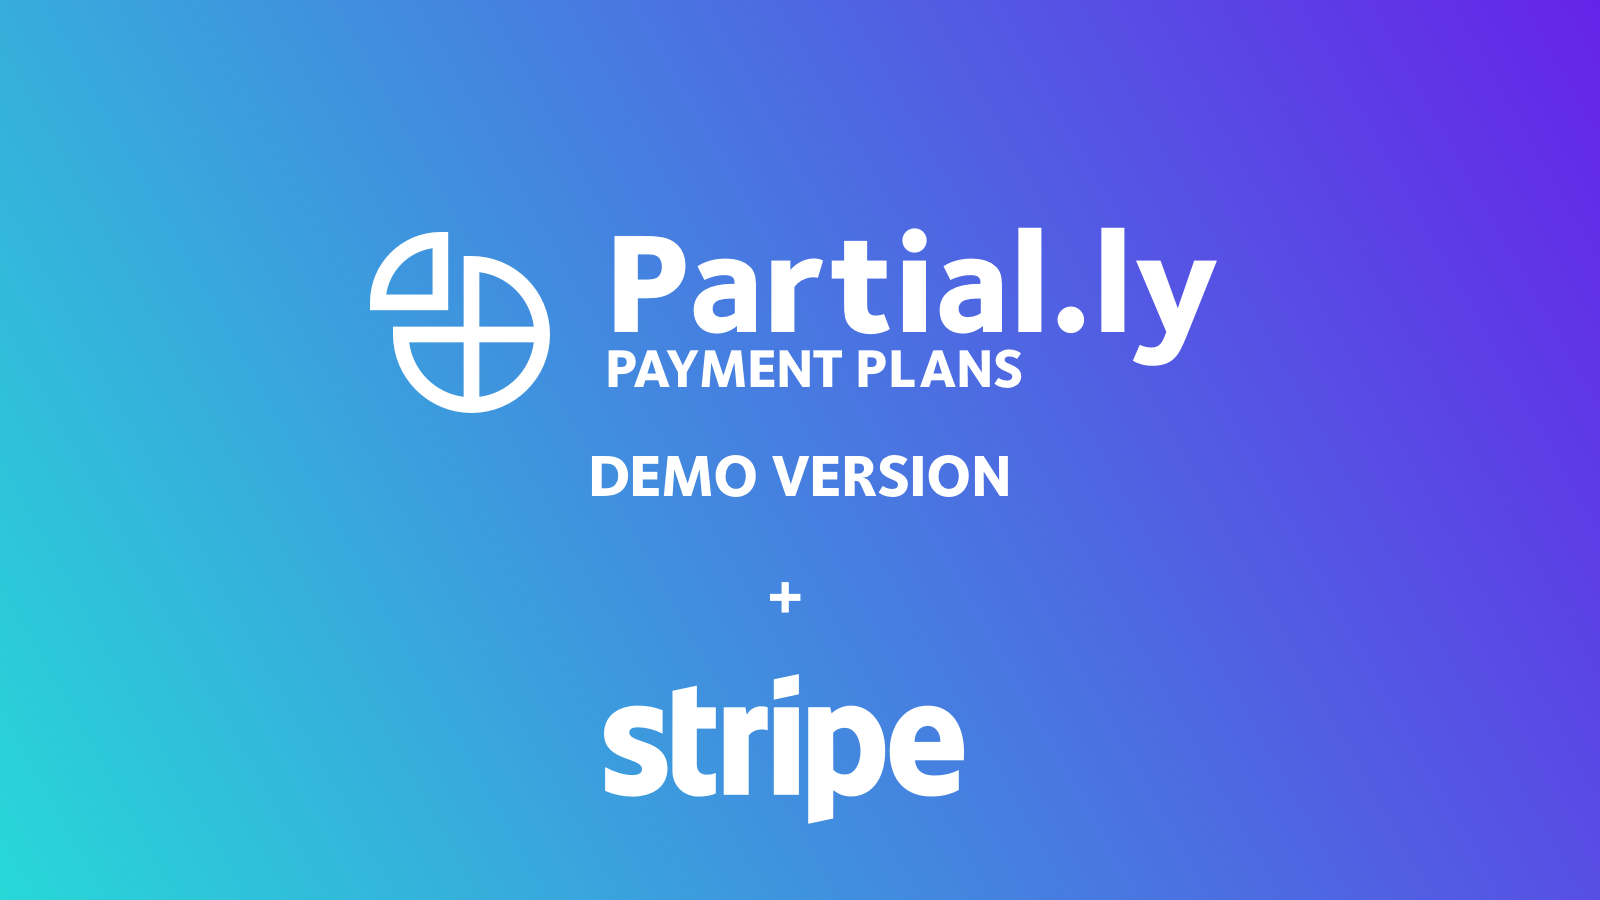 Partial.ly demo accounts - use Partial.ly in test mode